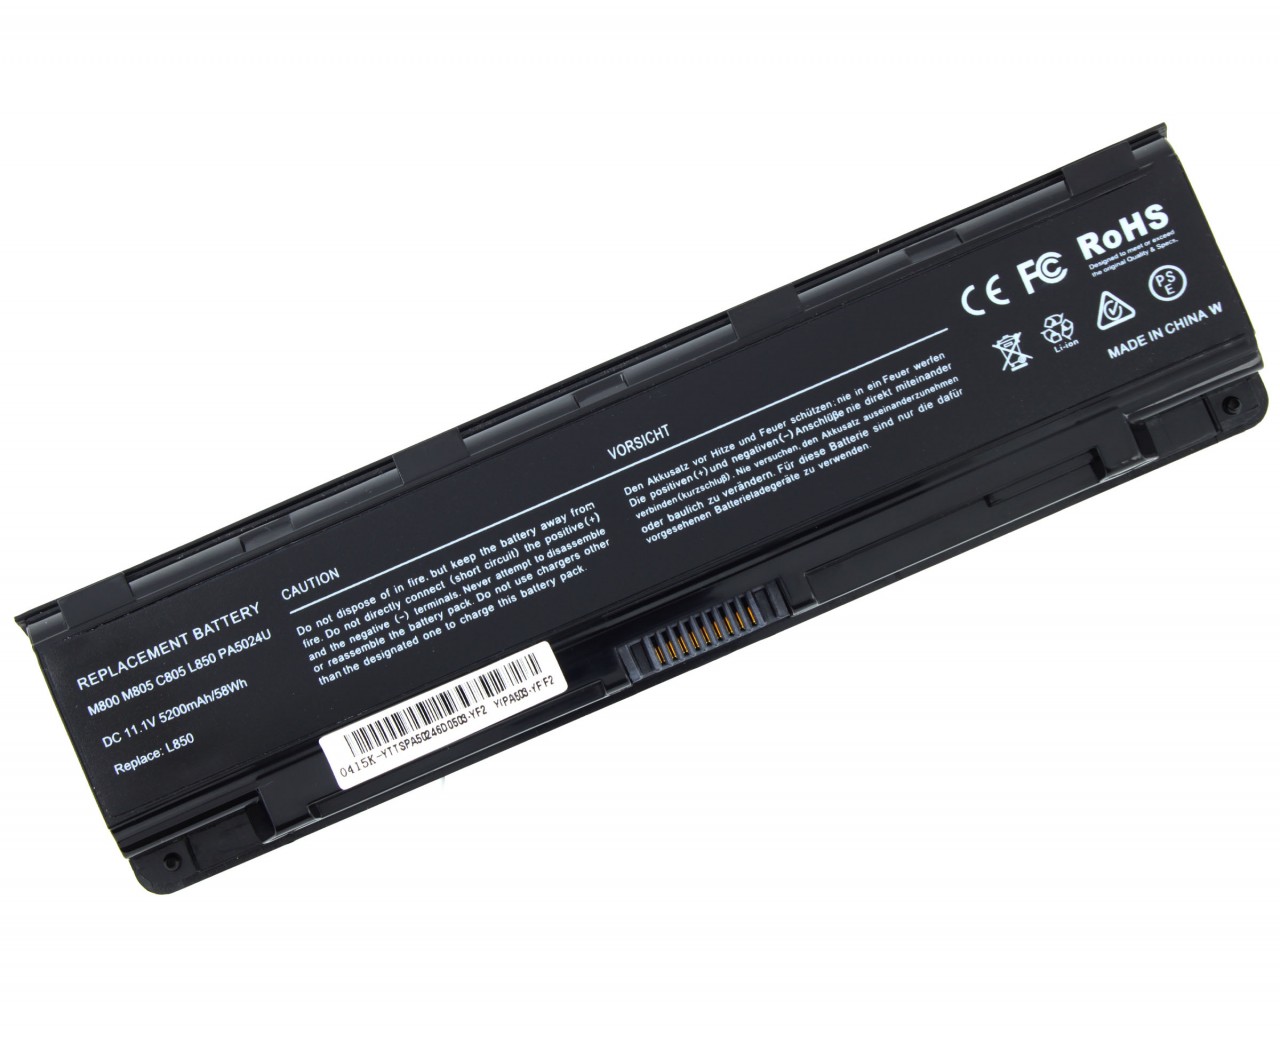 Baterie Toshiba Satellite S70 A 58 Wh / 5200 mAh image3